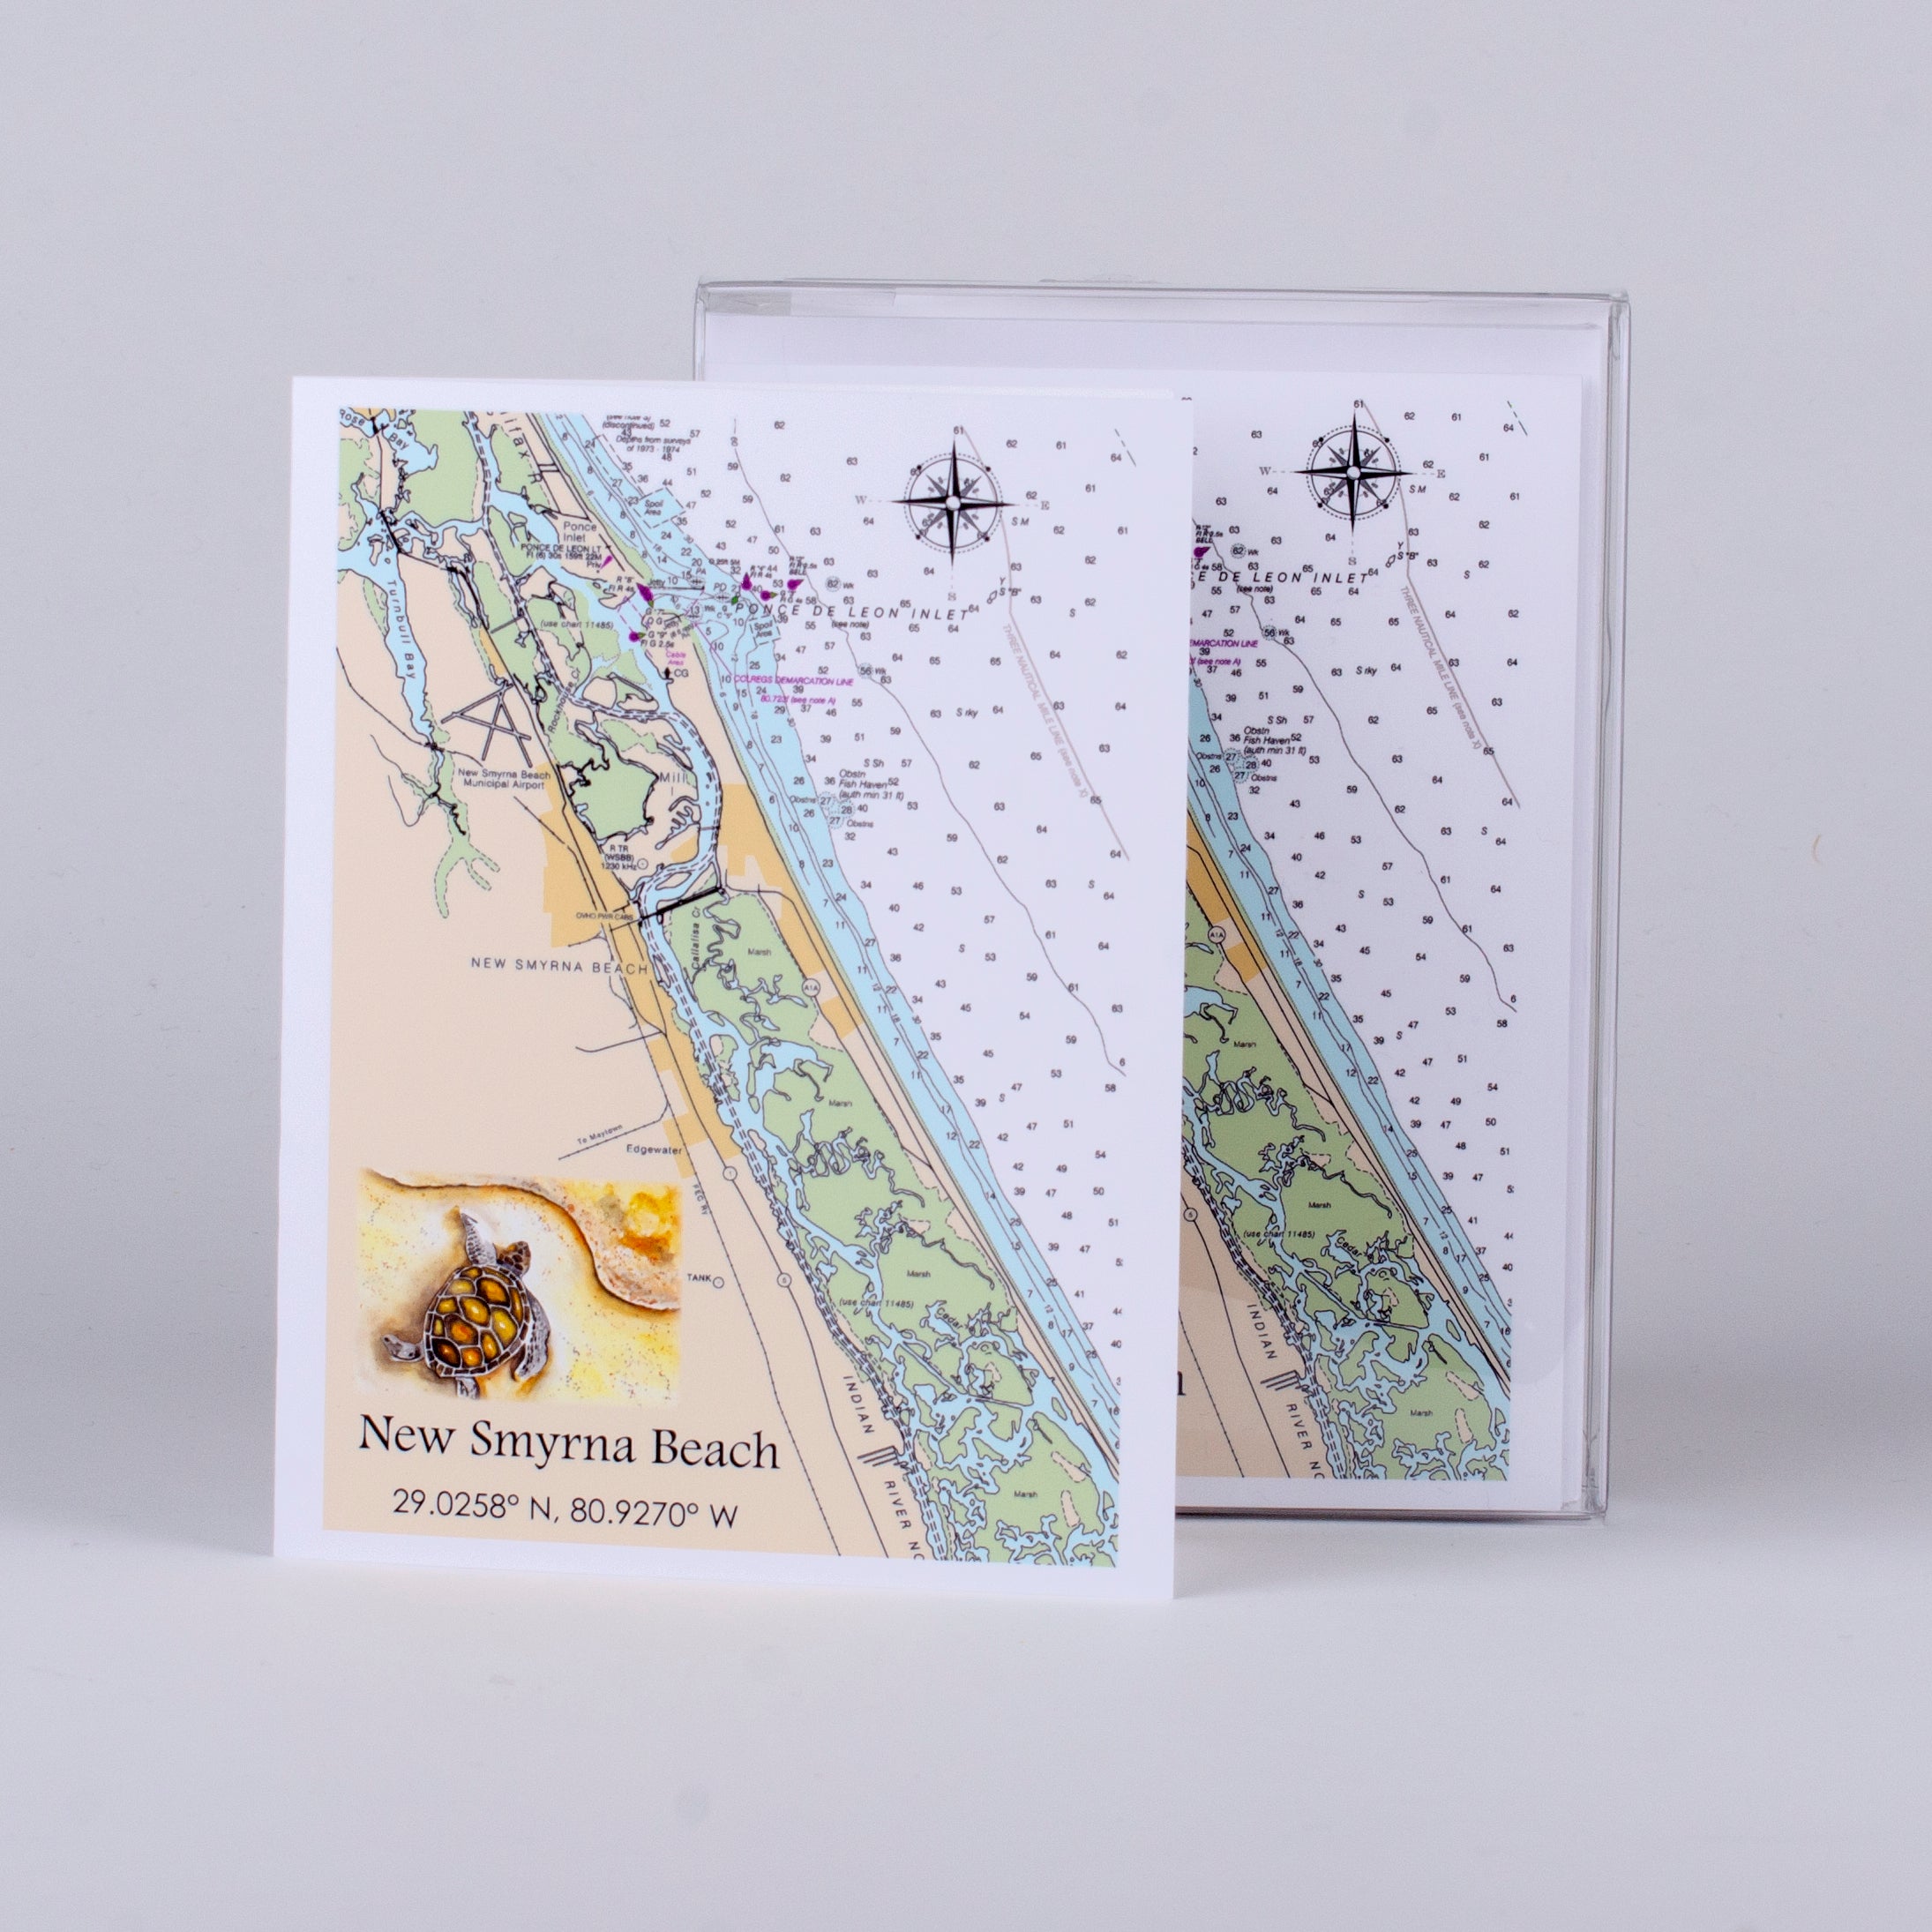 Set of 5 notecards and envelopes on front-New Smyrna Beach Nautical Chart with Sea Turtle (4"x5.25")